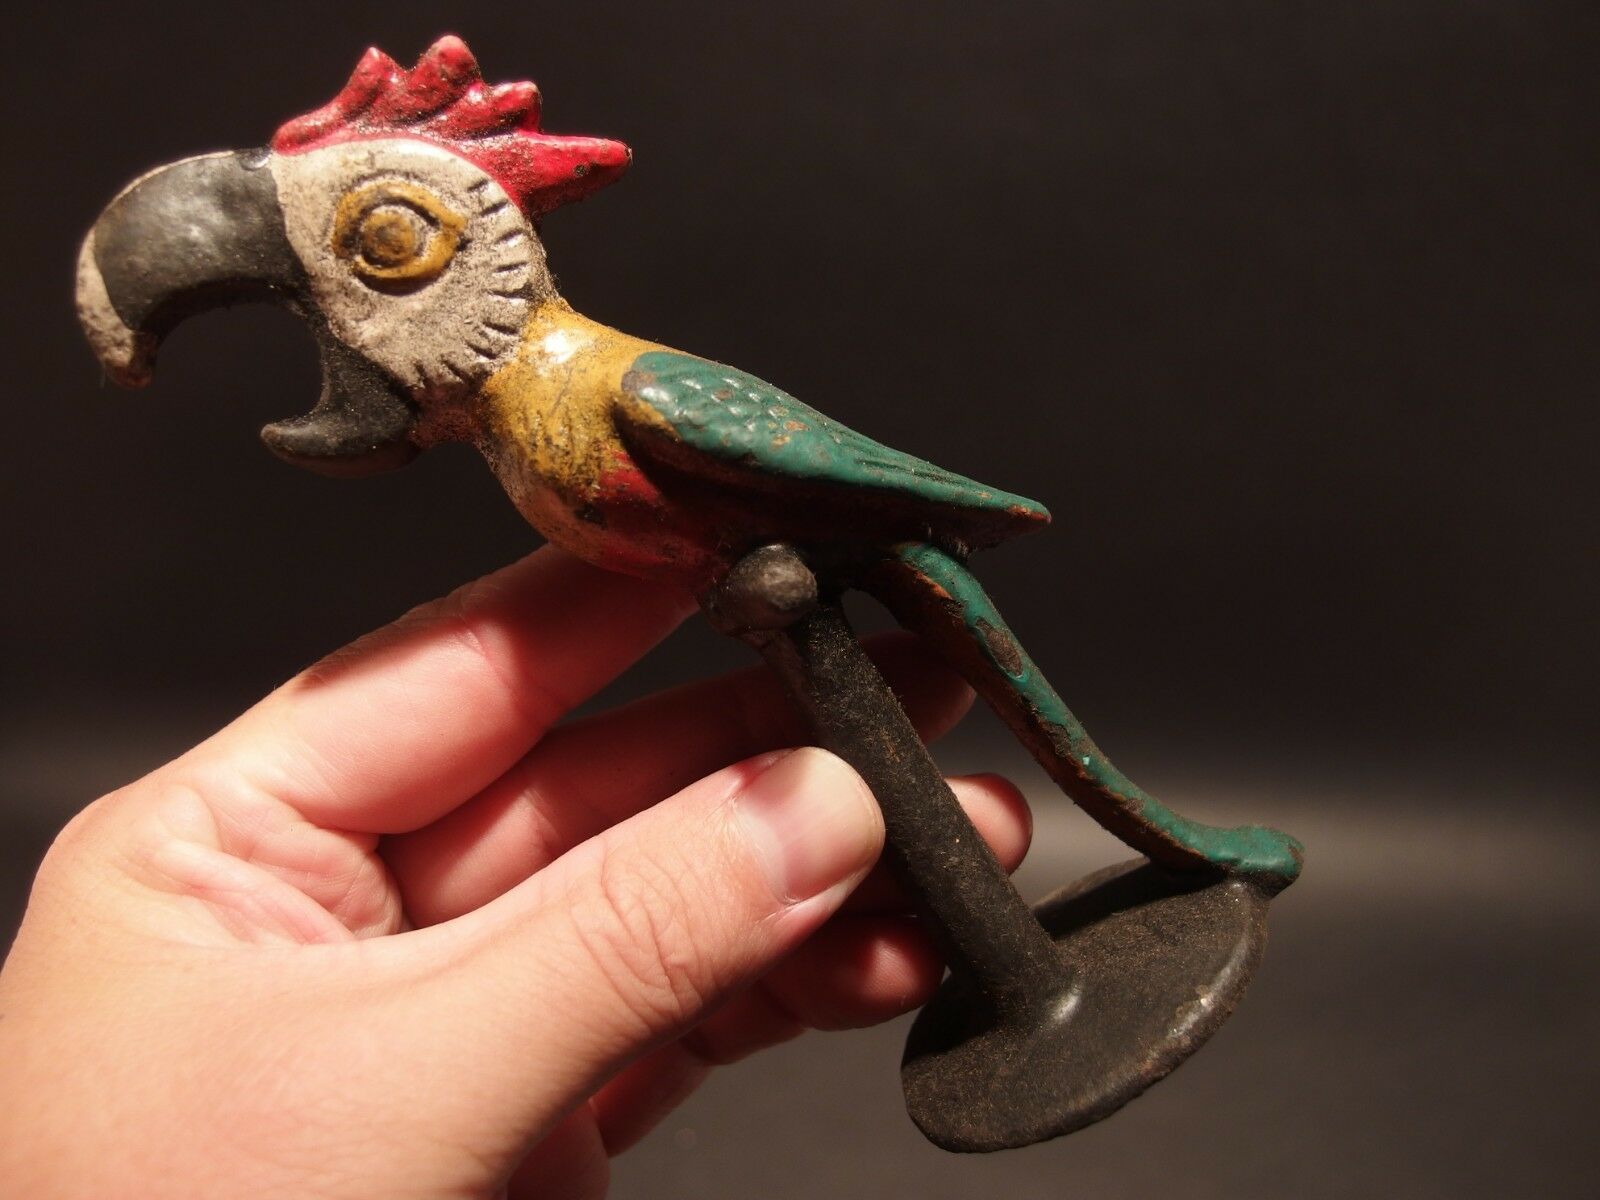 Antique Vintage Style Cast Iron Parrot Beer Bottle Opener bar tool - Early Home Decor